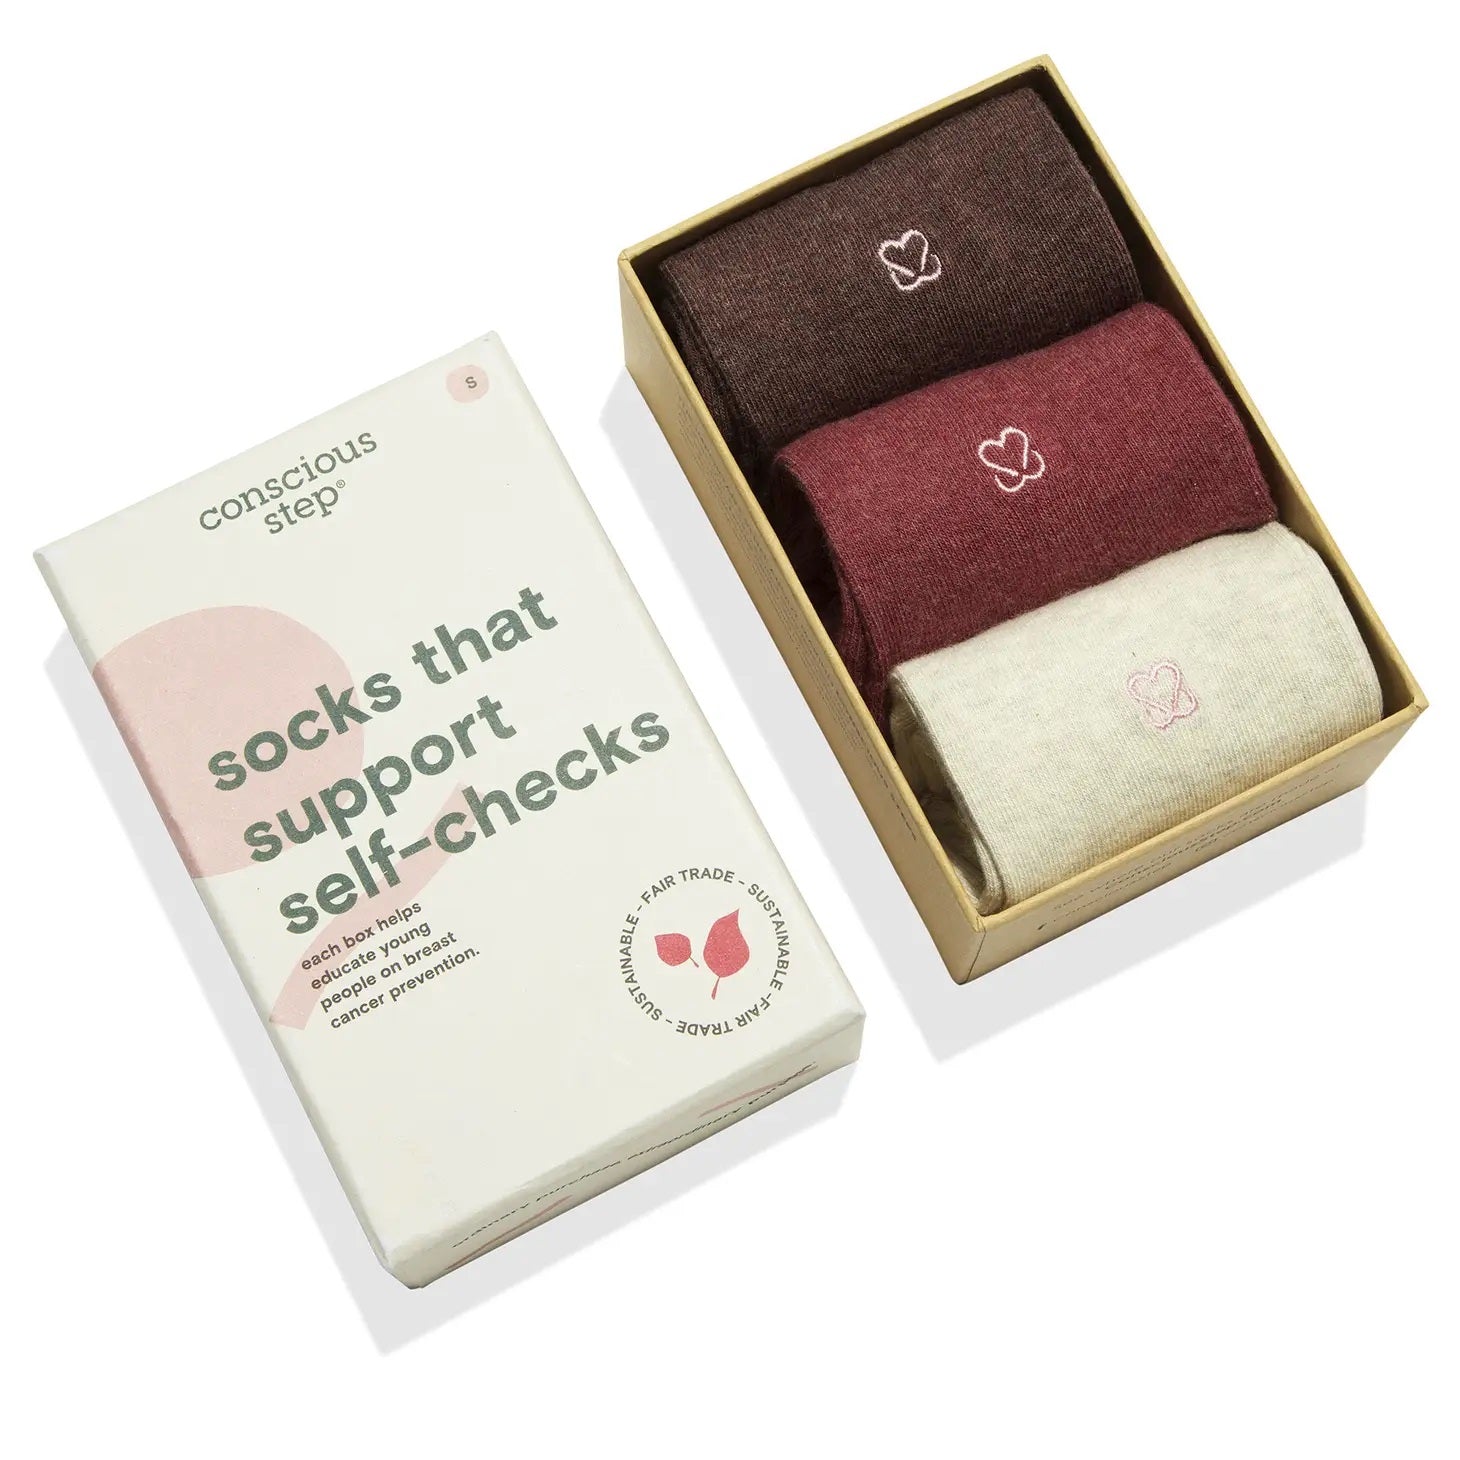 Conscious Step, Boxed Set Socks That Support Self Checks Prevent Breast Cancer - Boutique Dandelion